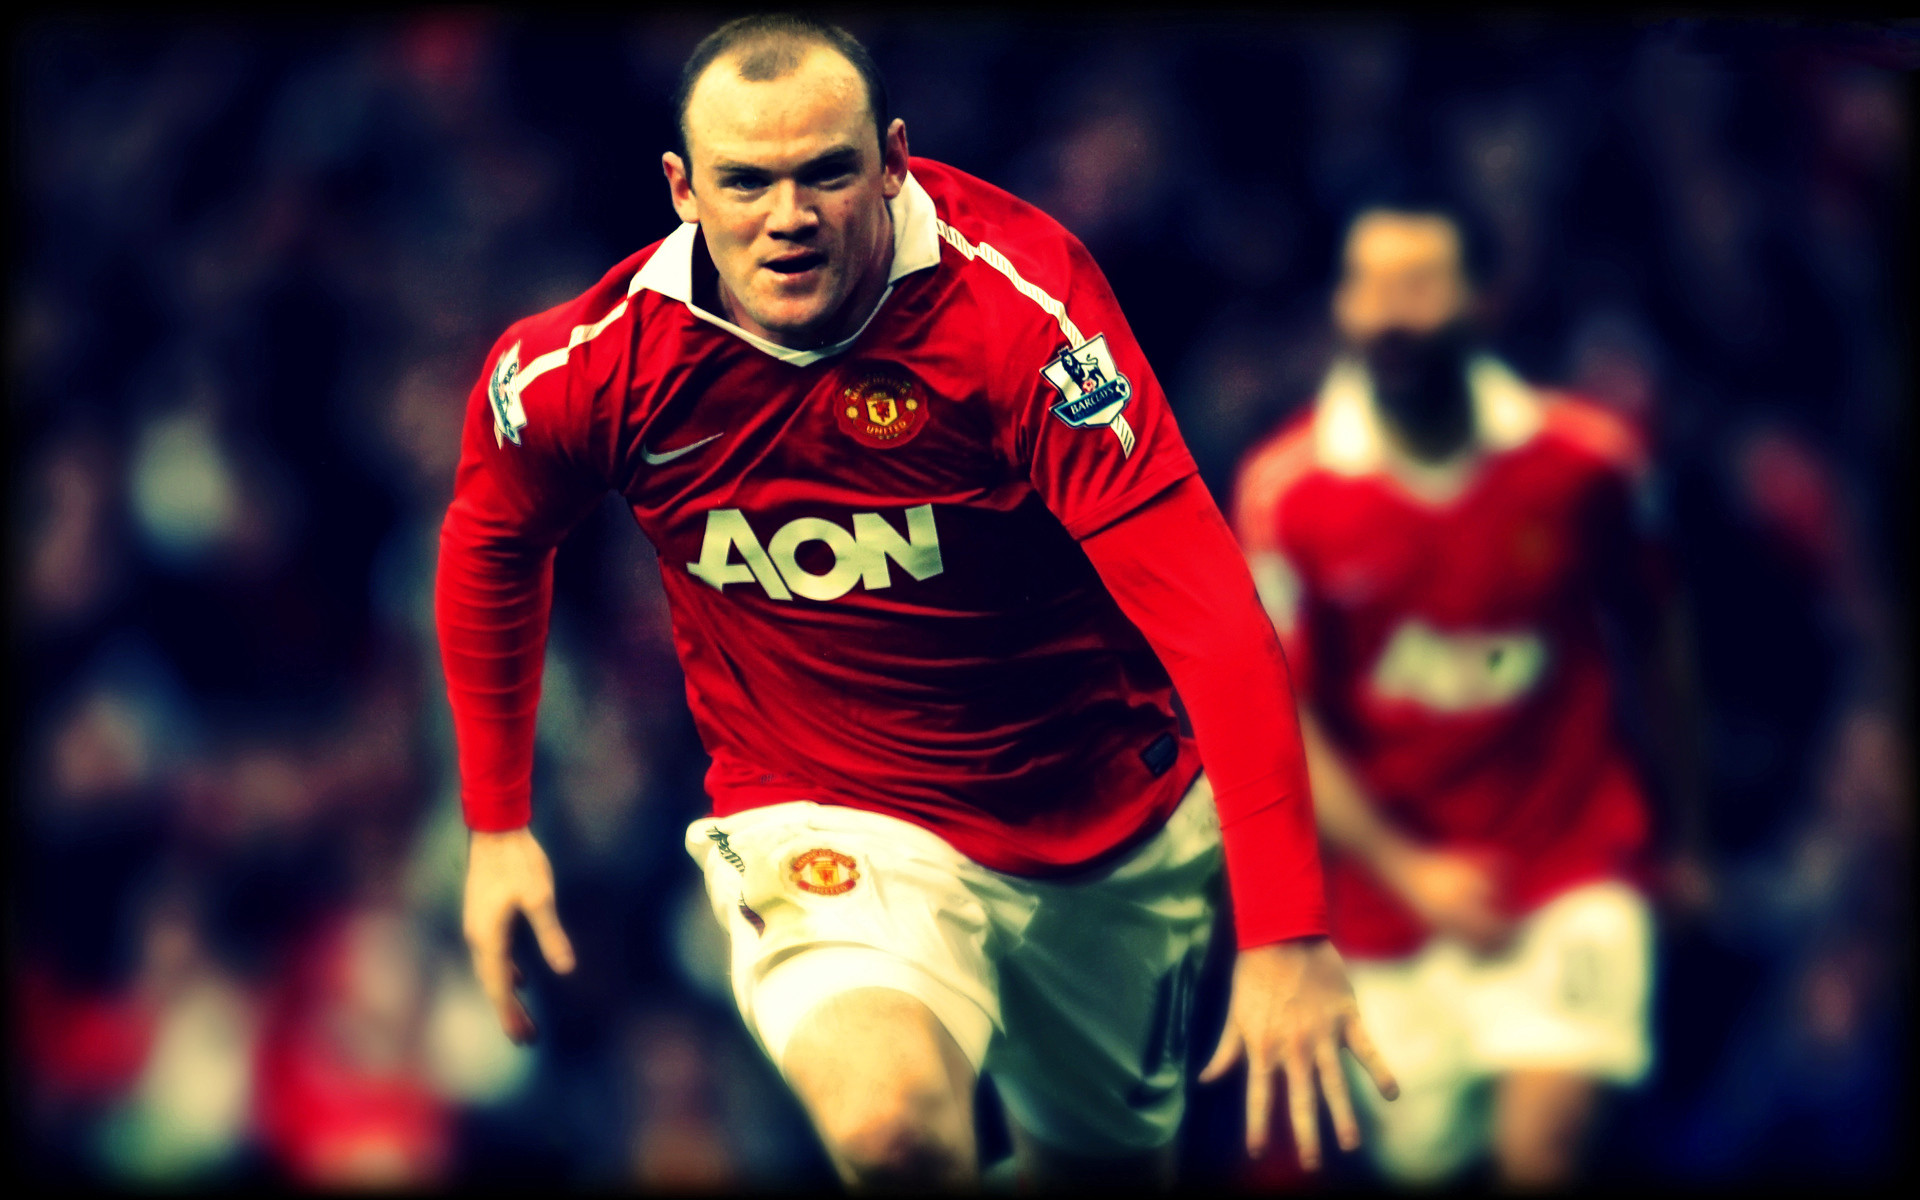 1920x1200 Related Wallpapers from Tony Romo. Wayne Rooney